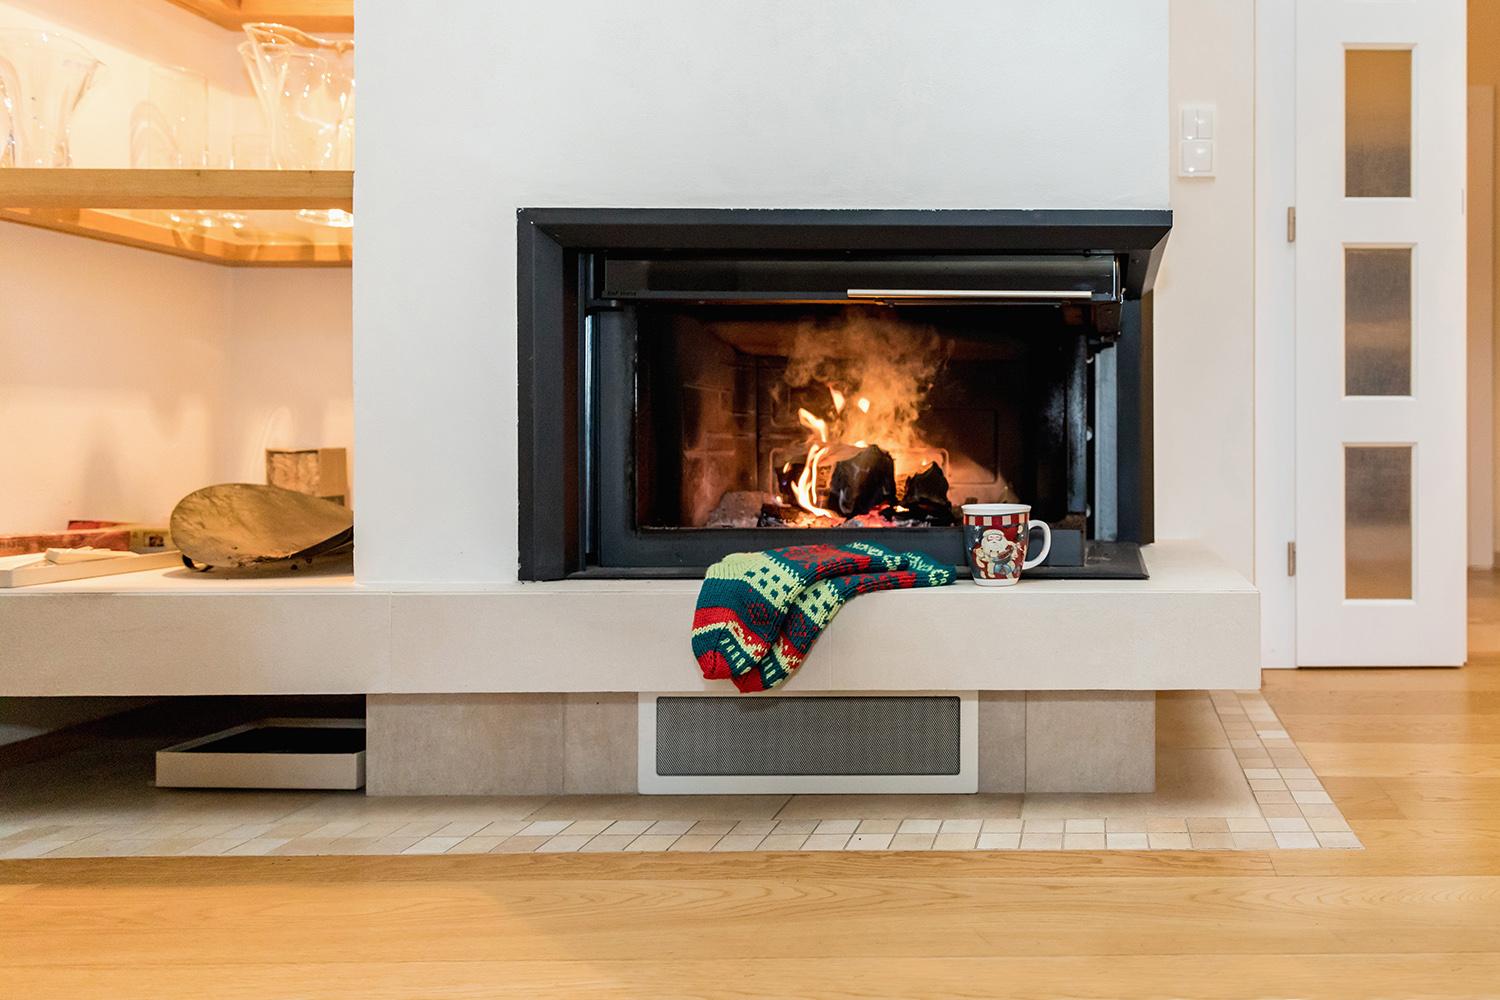 Woollen socks by the Christmas fireplace. Wool socks at a modern Christmas fireplace. Close up on feet. Winter and Christmas holidays concept.